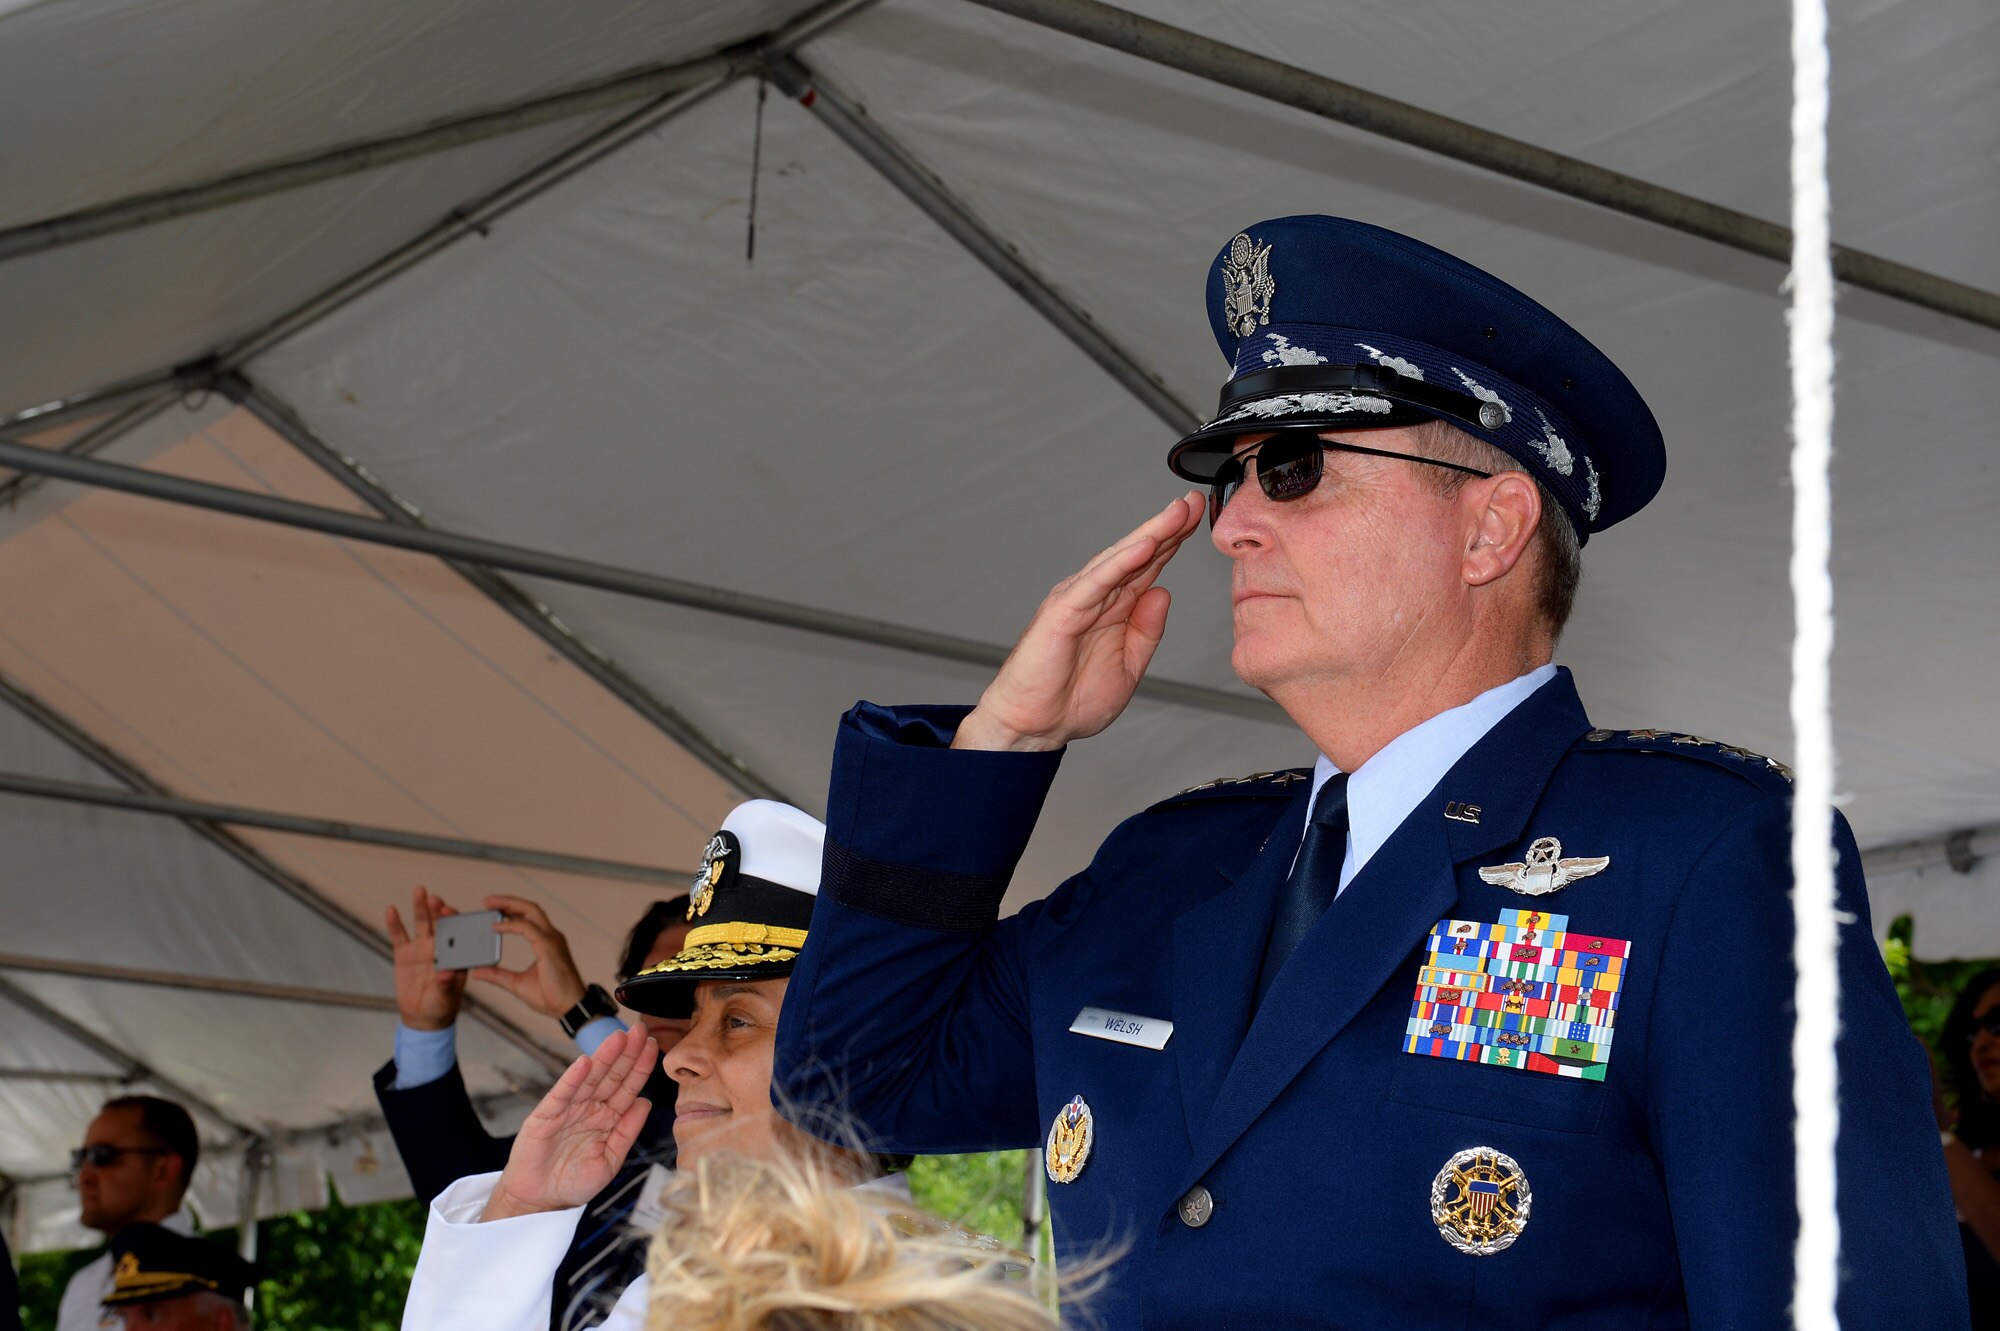 Air Force Chief of Staff Gen. Mark A. Welsh III salutes military members marching in the National Memorial Day Parade in Washington, D.C., May 25, 2015. The National Memorial Day Parade was first launched in 2005 by the American Veterans Center in Washington. Welsh also honored American veterans by attending a wreath-laying ceremony in Arlington National Cemetery. (U.S. Air Force photo/Scott M. Ash)